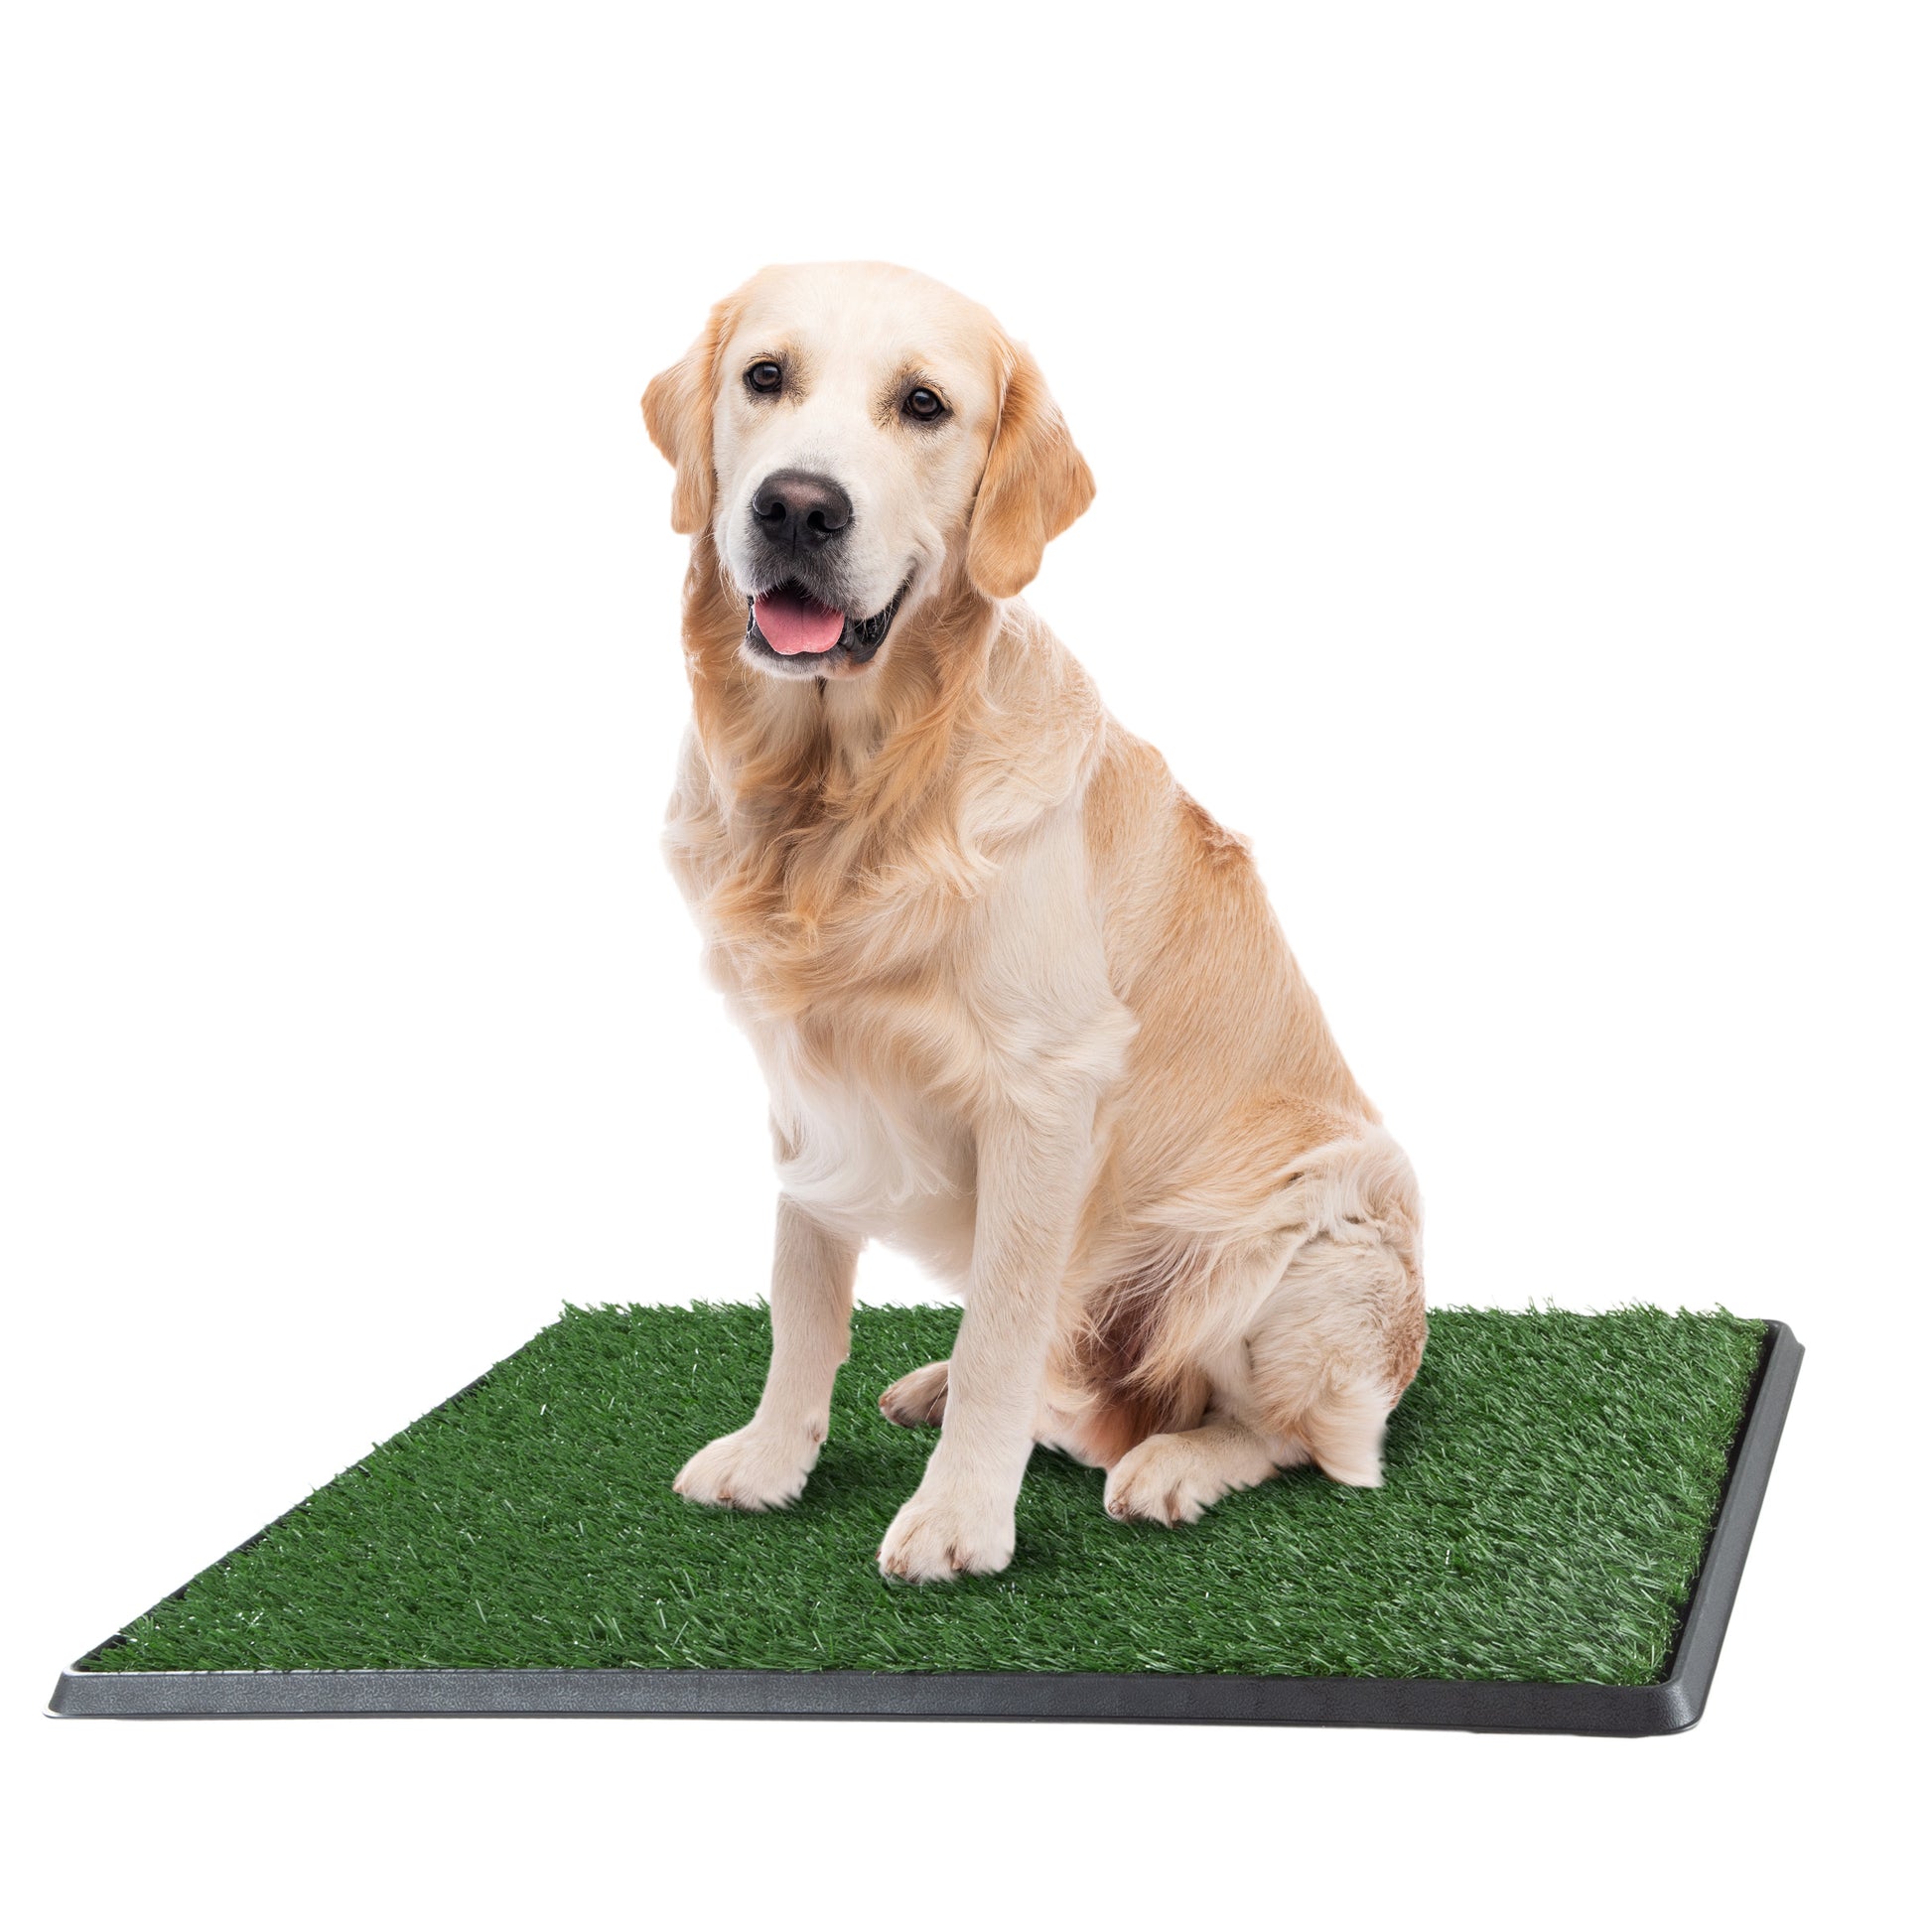 Golden Retriever adult dog sits on a pee pad obediently waiting the owner to get home from work.  